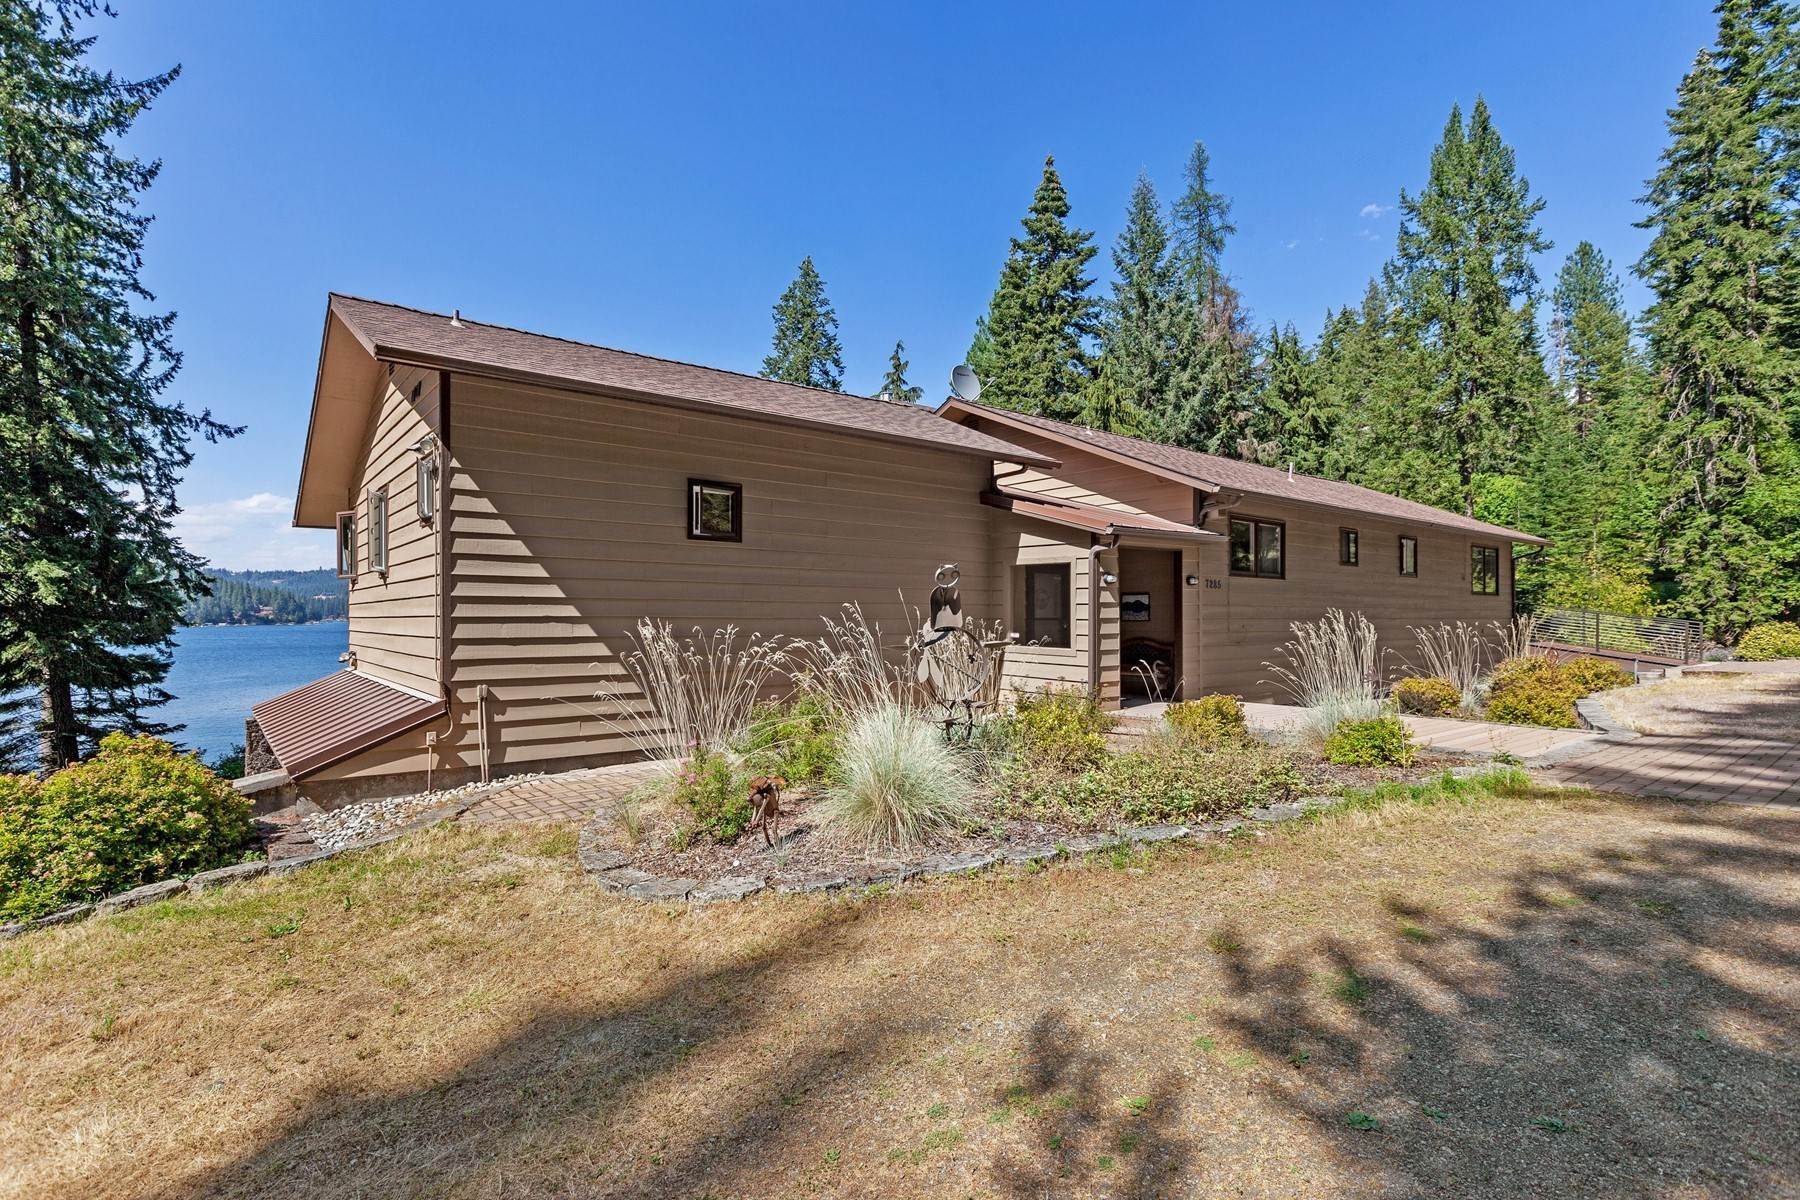 38. Single Family Homes for Sale at Hayden Lake Mountain Retreat 7285 E Henry Point Rd Hayden, Idaho 83835 United States